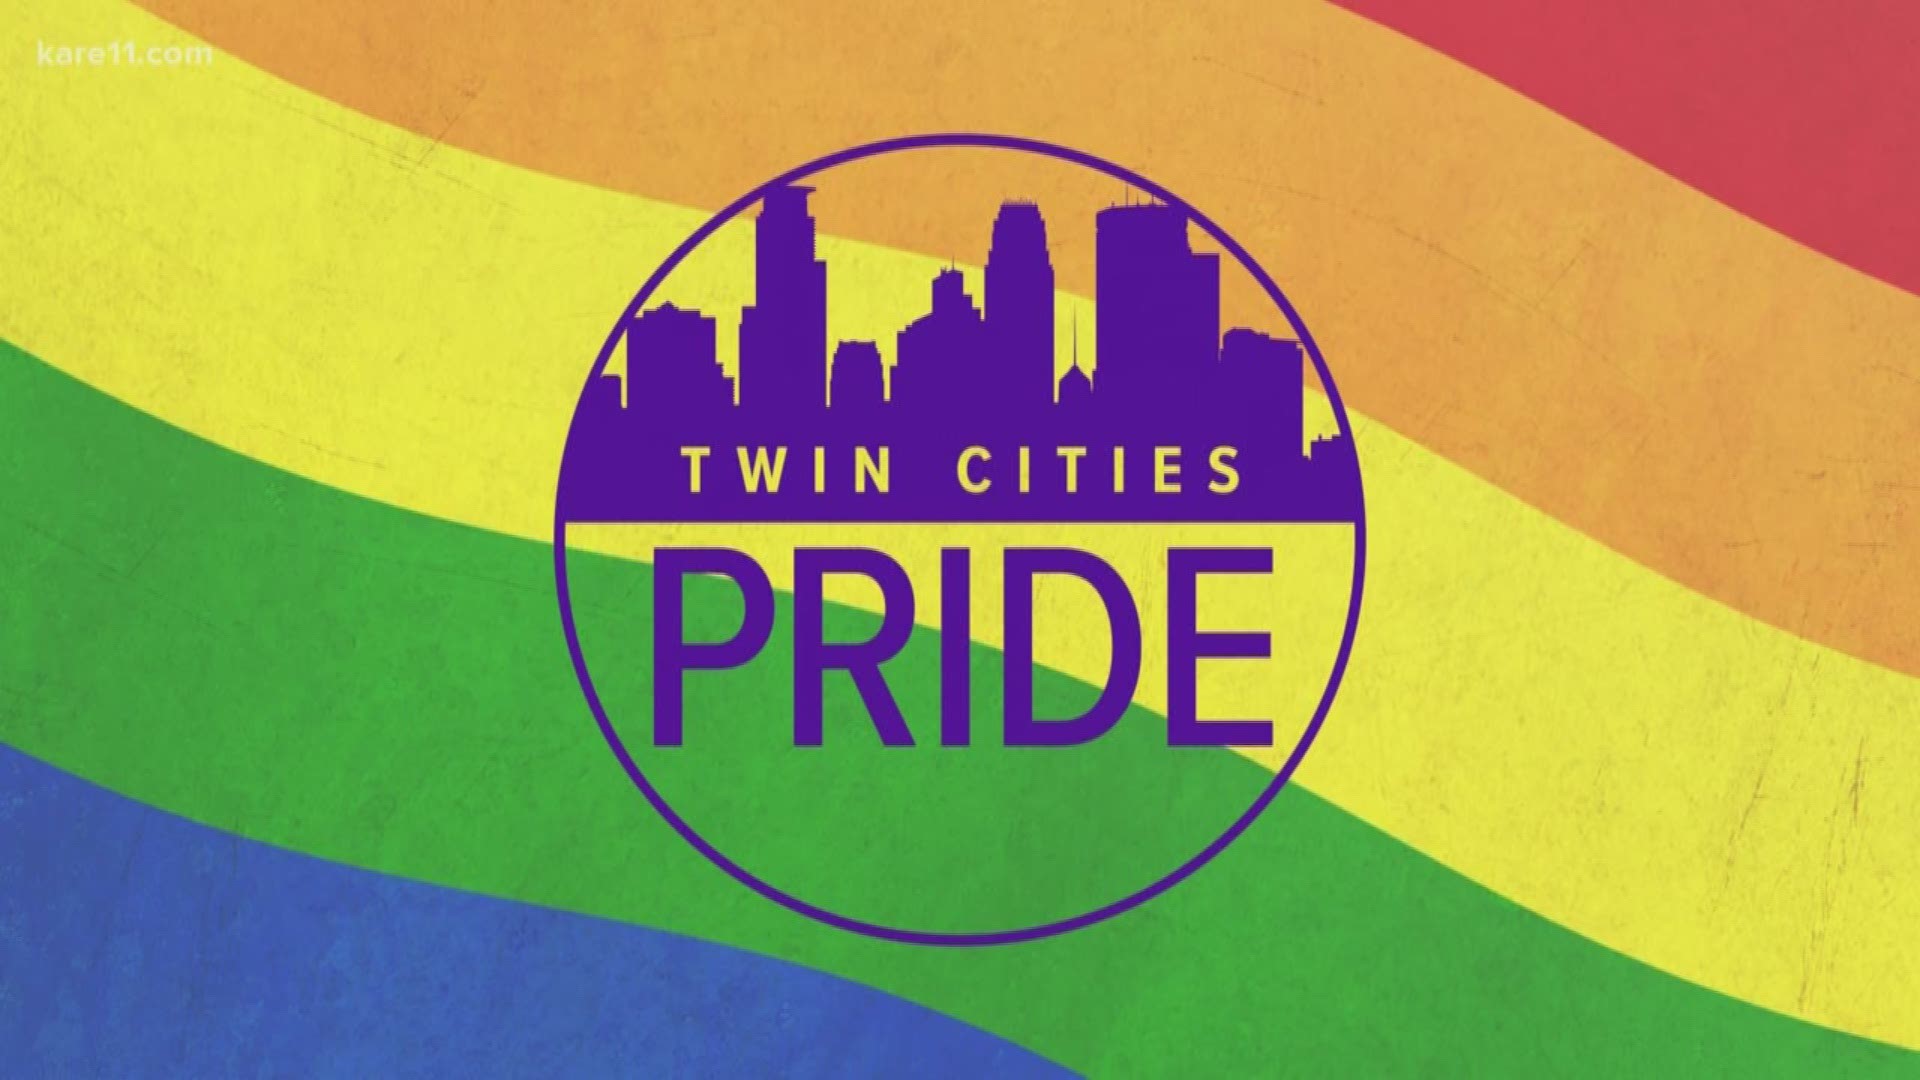 What you need to know ahead of one of the biggest Pride celebrations in the country.